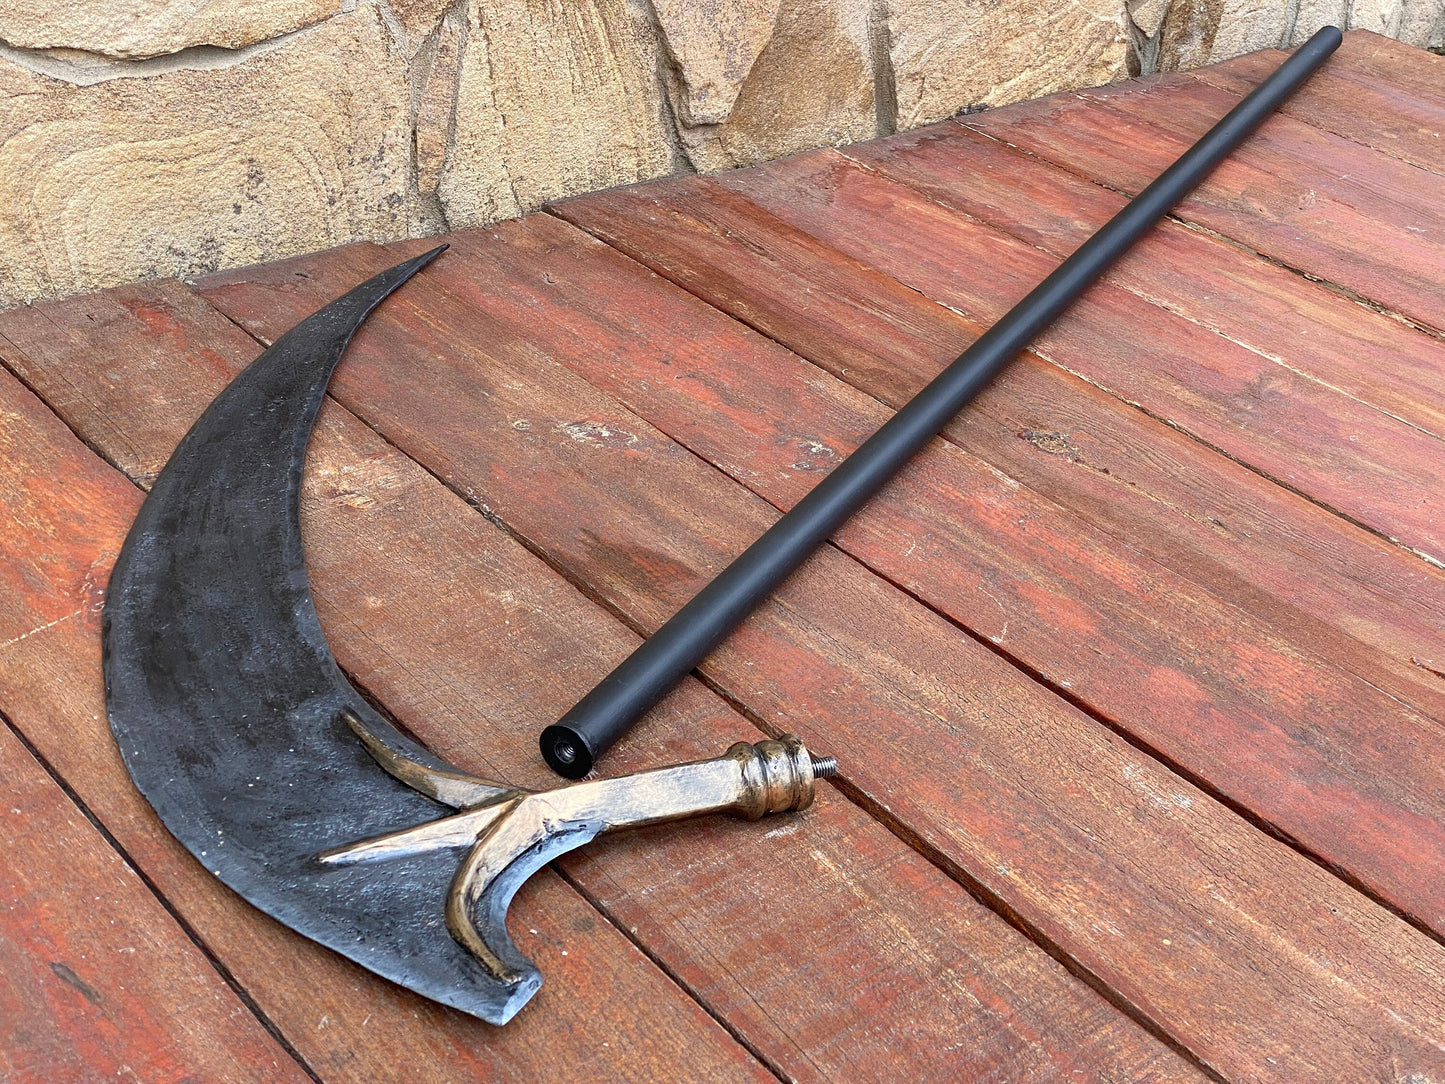 Scythe, iron gift, costume weapon, cosplay, prop, Halloween, gamer gift, cosplay armor, death, soul, dead, birthday, Christmas, mens gift